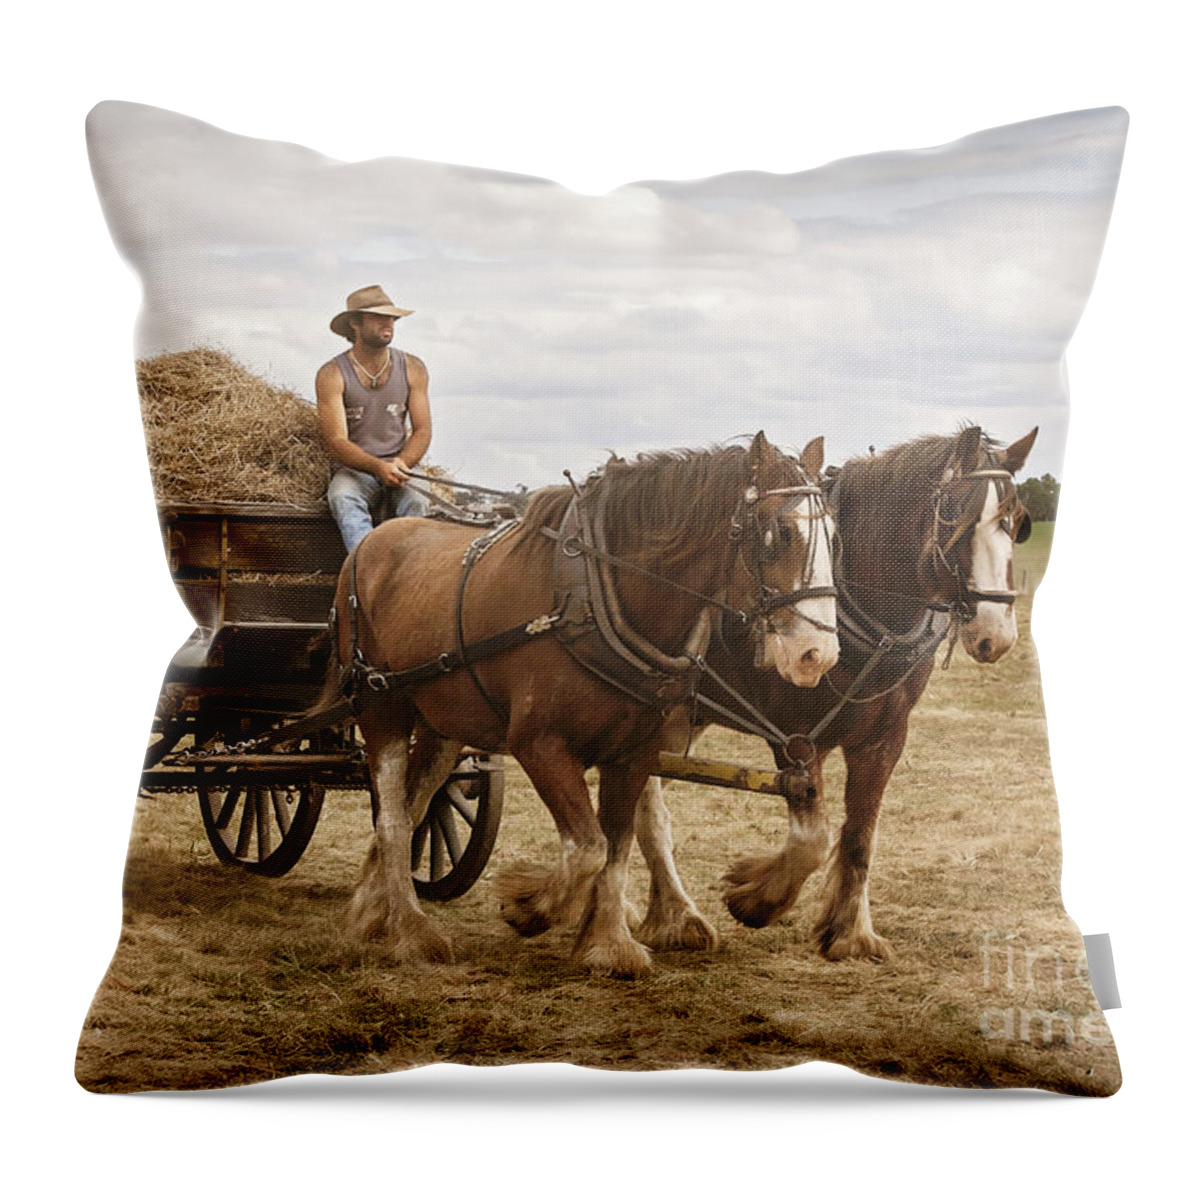 Horse Throw Pillow featuring the photograph Carting Hay by Linda Lees